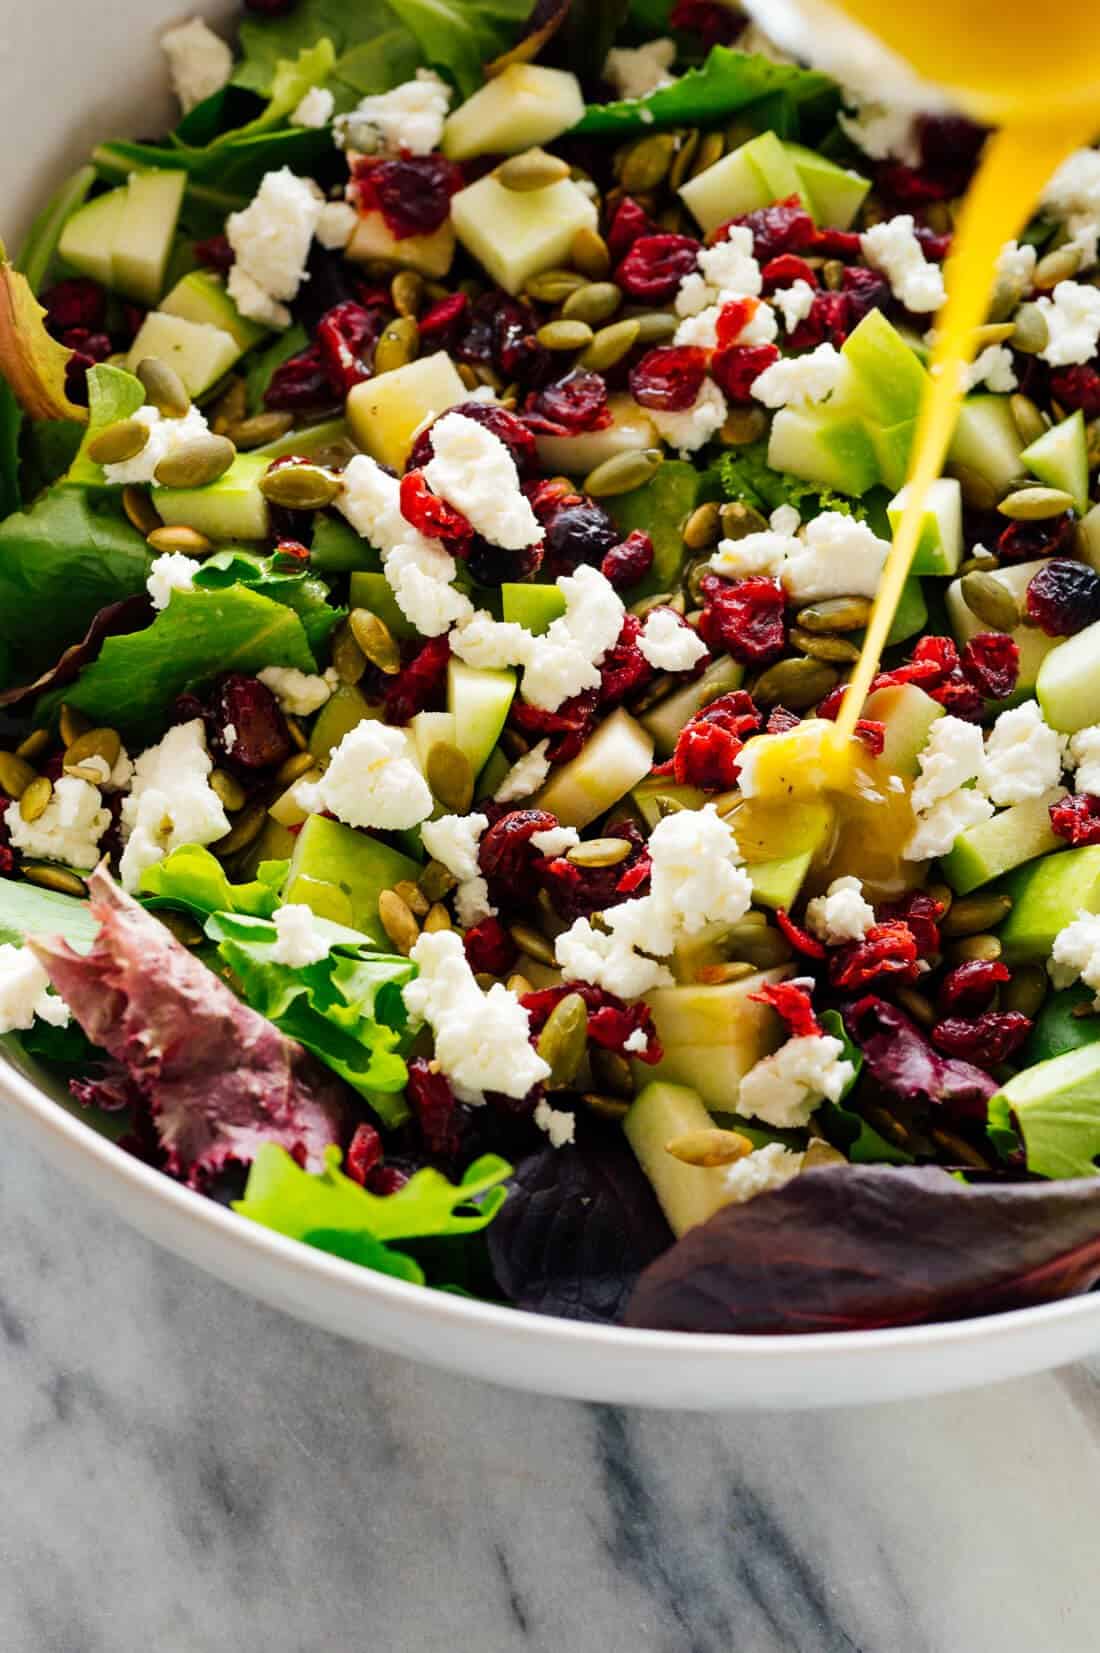 Favorite Green Salad With Apples, Cranberries And Pepitas - Manis Passion